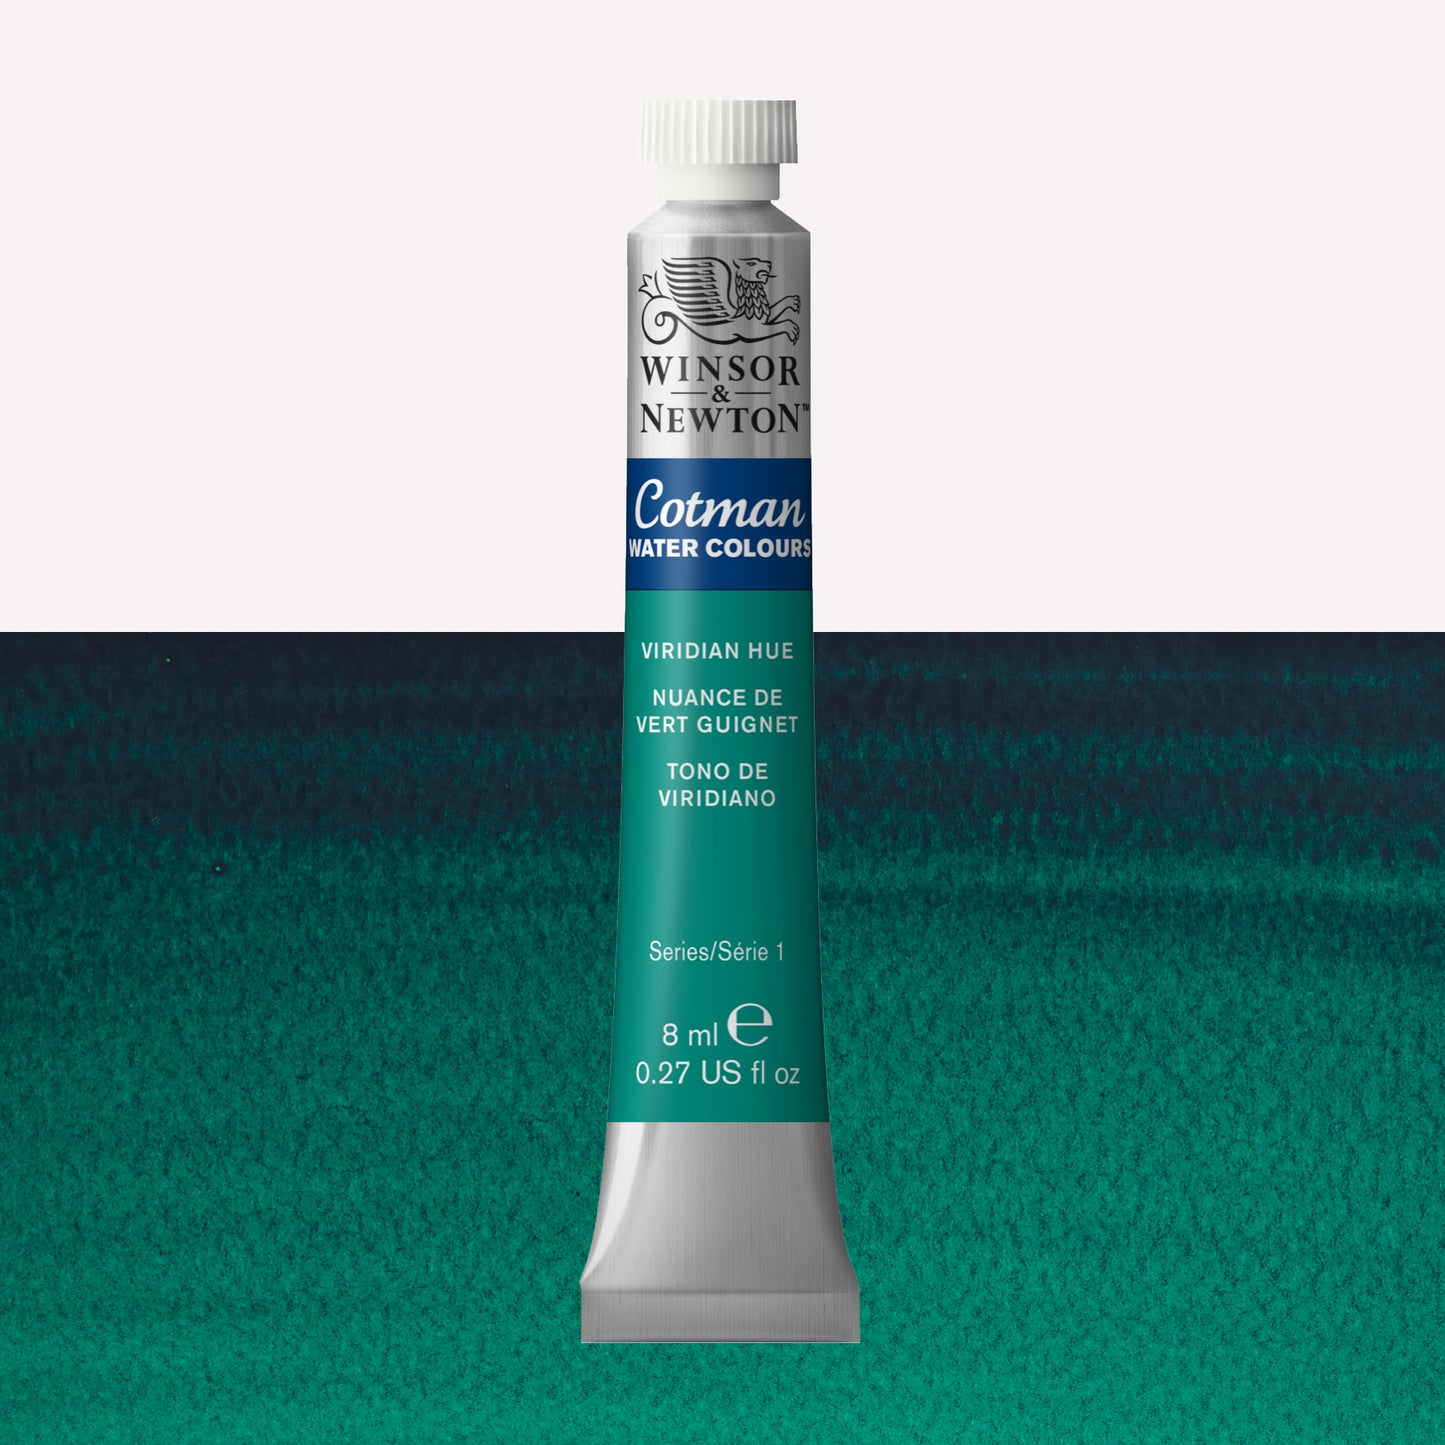 Winsor & Newton Cotman watercolour paint packaged in 8ml silver tube with a white lid in the shade Viridian Hue over a highly pigmented colour swatch.